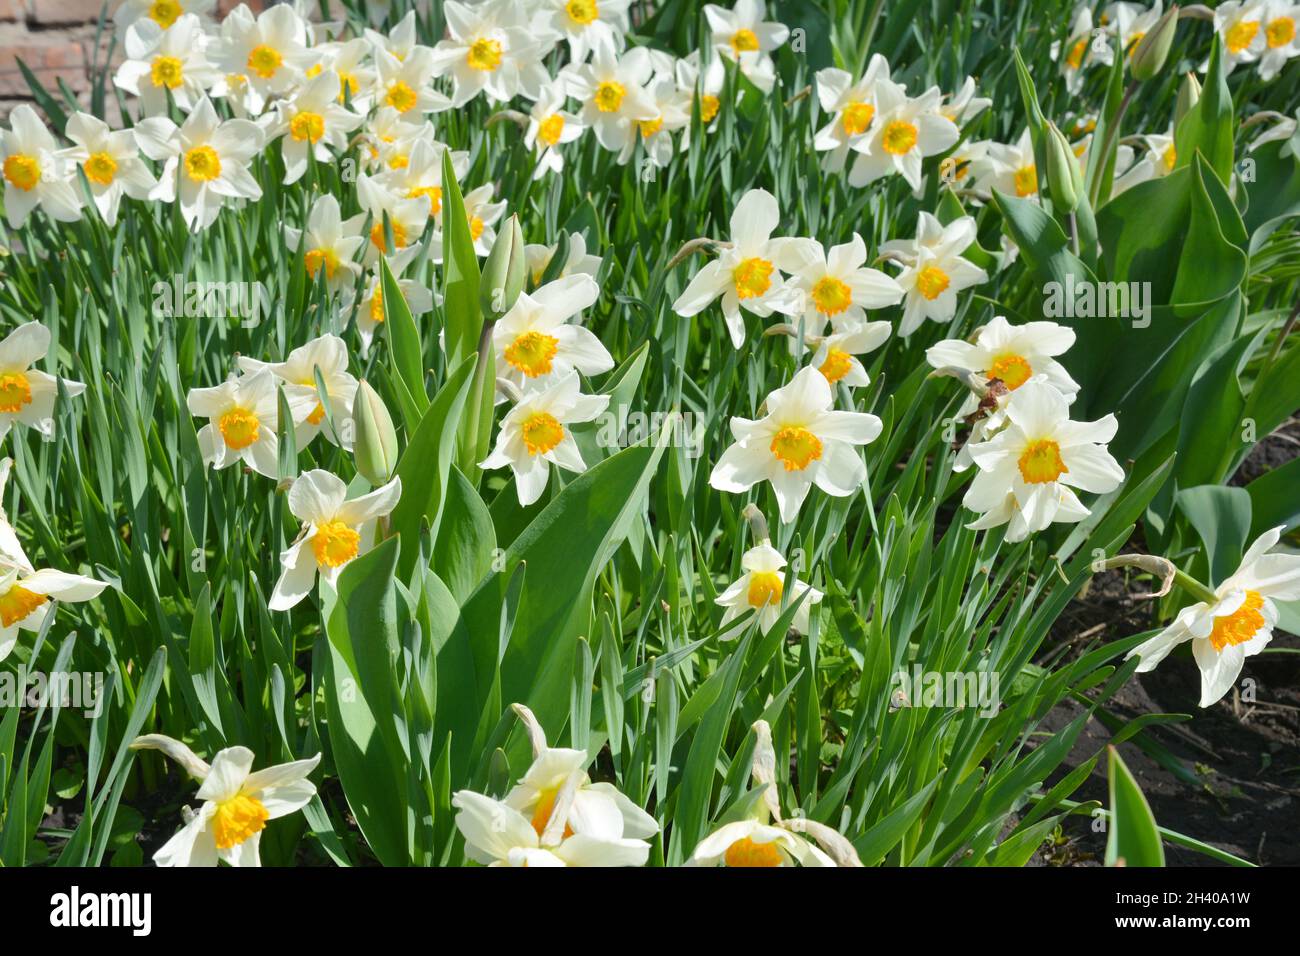 Narcissus flowers flowerbed with drift yellow. White double daffodil flowers narcissi daffodils. Narcissus flower is known as daffodil, daffadowndilly Stock Photo